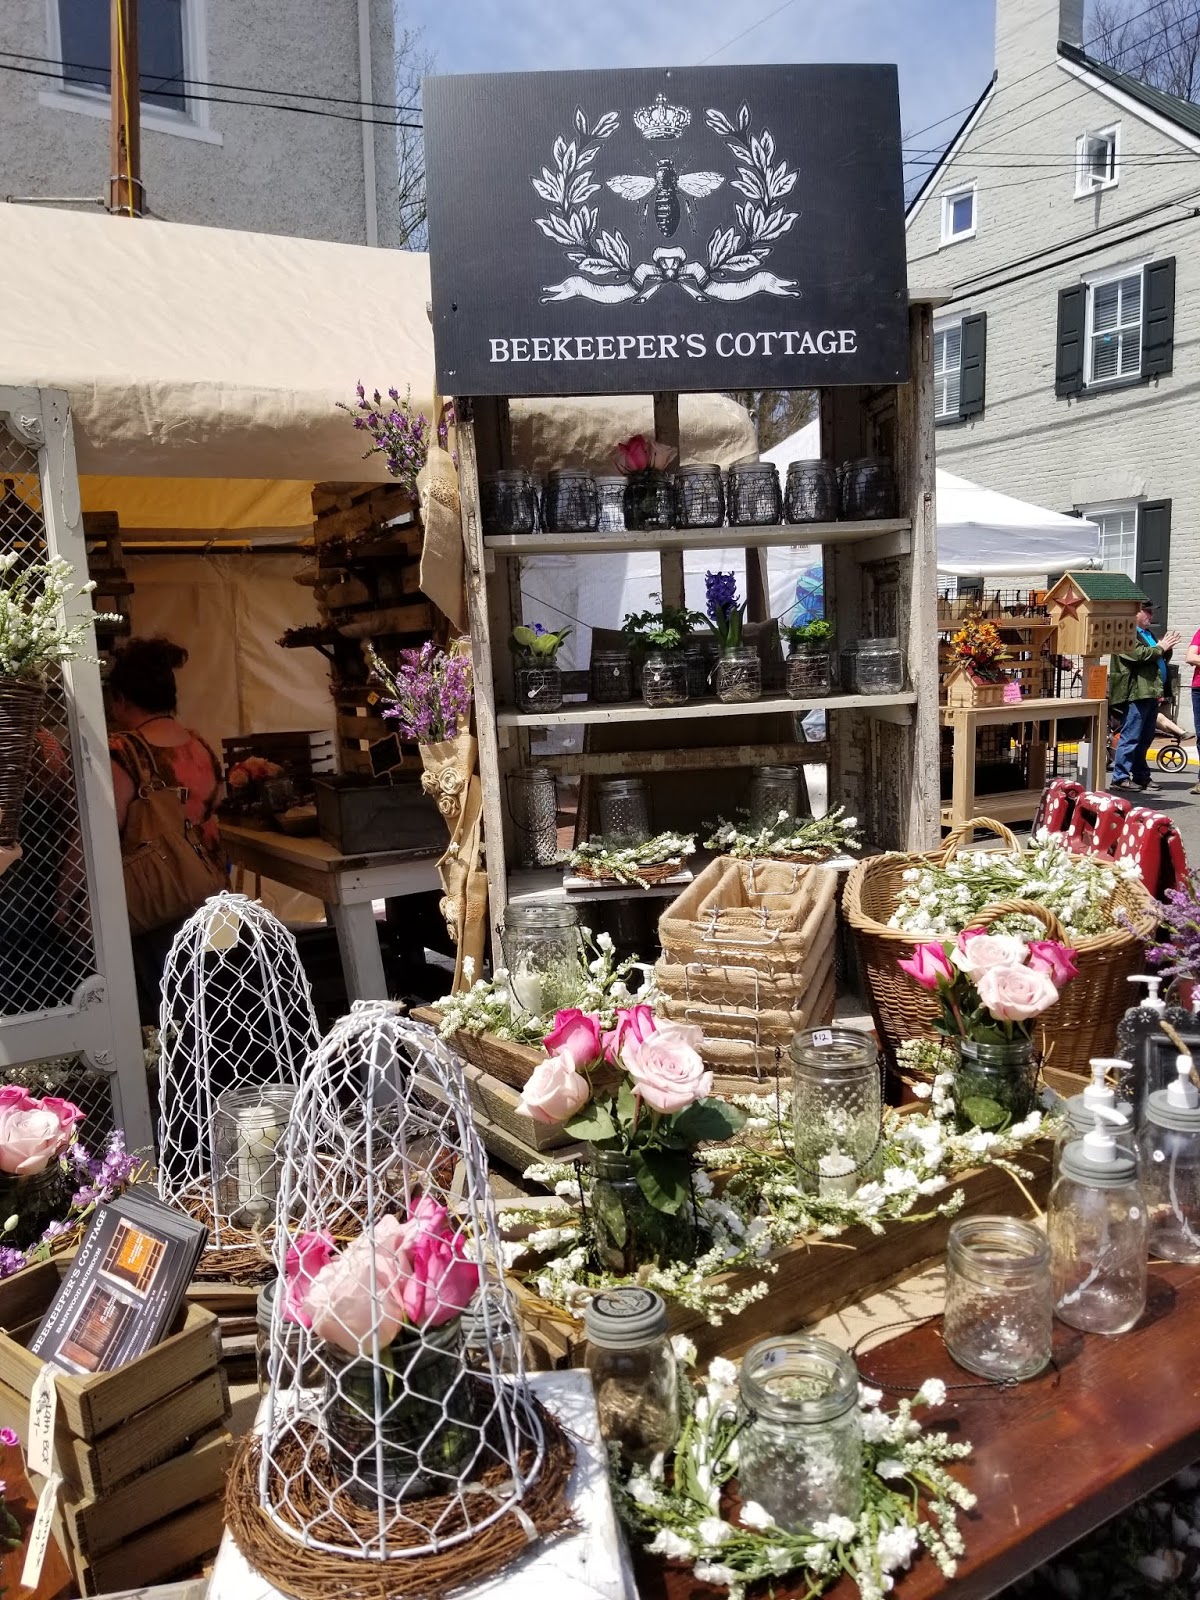 beekeeper's cottage: the leesburg flower and garden festival 2018